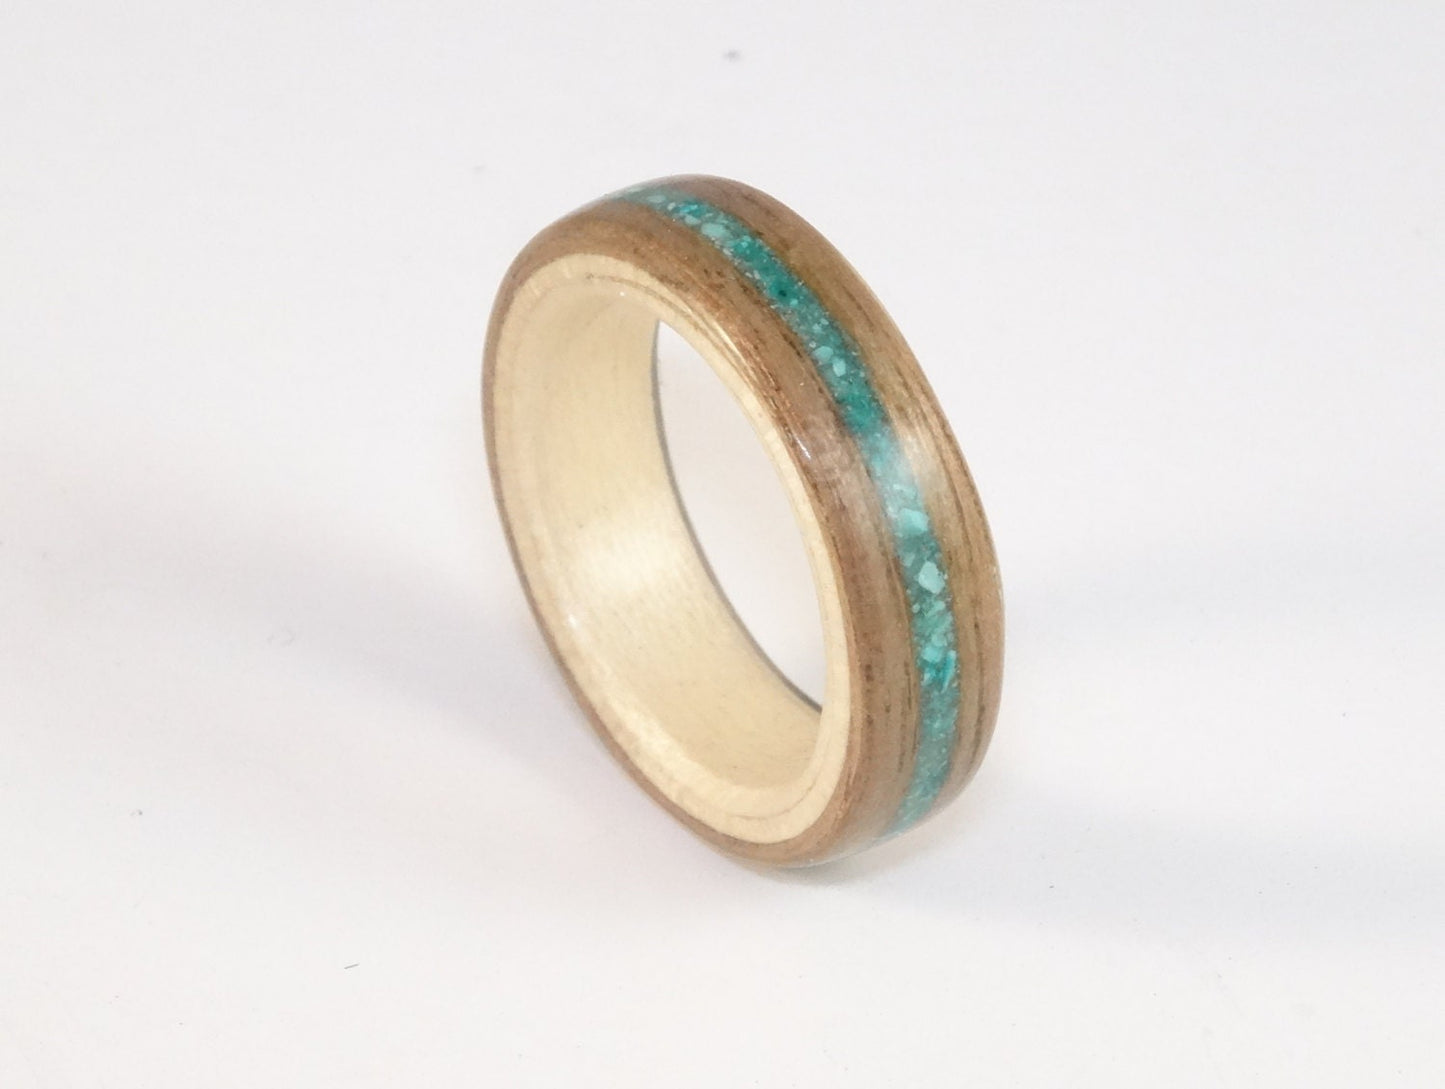 Walnut & Sycamore with Turquoise Bent Wood Ring